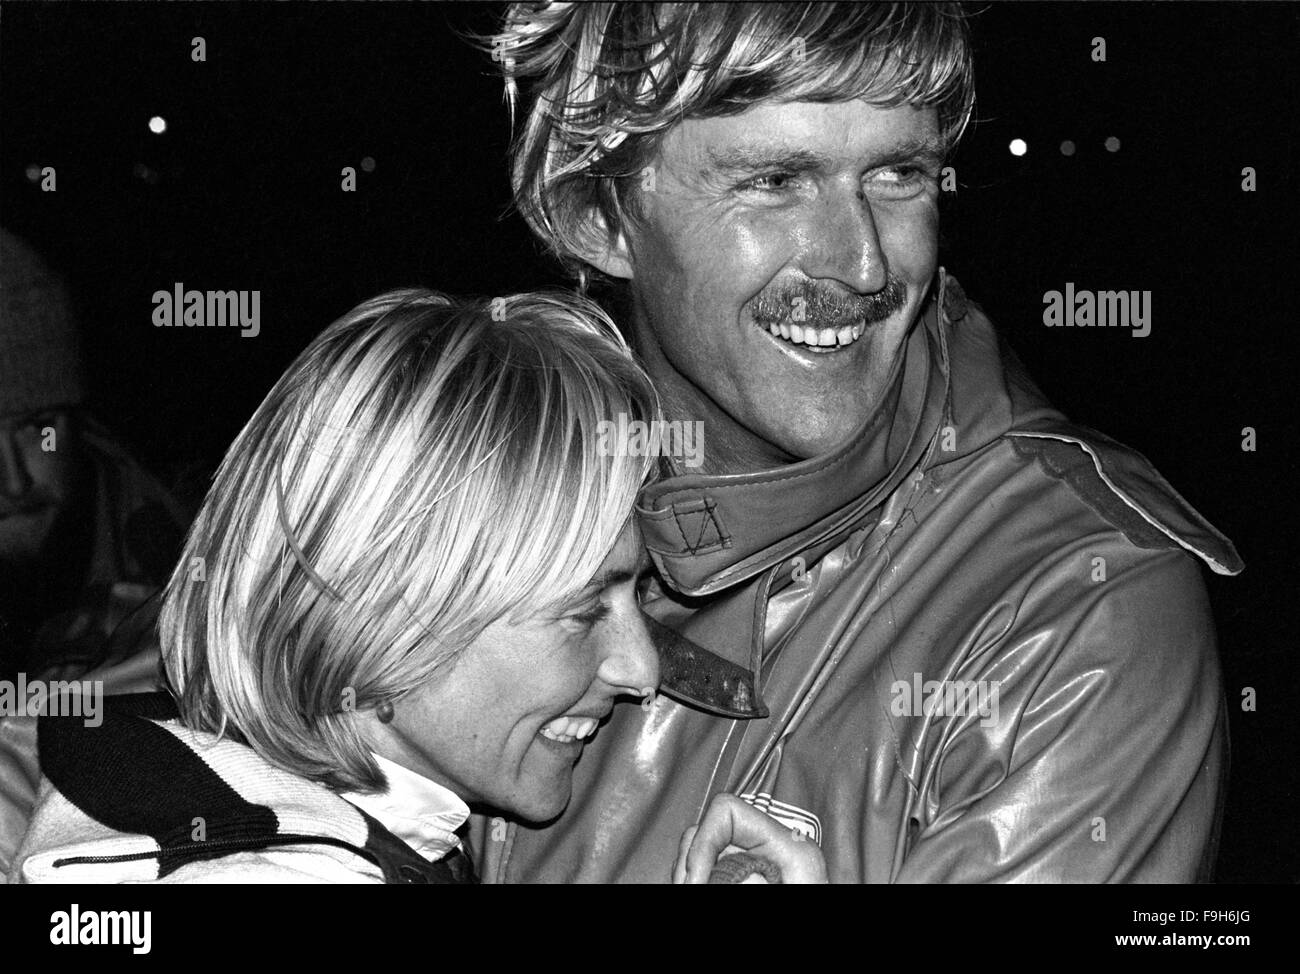 AJAXNETPHOTO. MARCH 30TH, 1982. PORTSMOUTH, ENGLAND -  HOME AT LAST - KIWI YACHT ARRIVES - CERAMCO NEW ZEALAND ARRIVES AT THE END OF THE FOURTH LEG OF THE WHITBREAD RACE. SKIPPER PETER BLAKE GETS A WARM WELCOME FROM HIS WIFE PIPPA. PHOTO:JONATHAN EASTLAND/AJAX REF;820304 5A Stock Photo